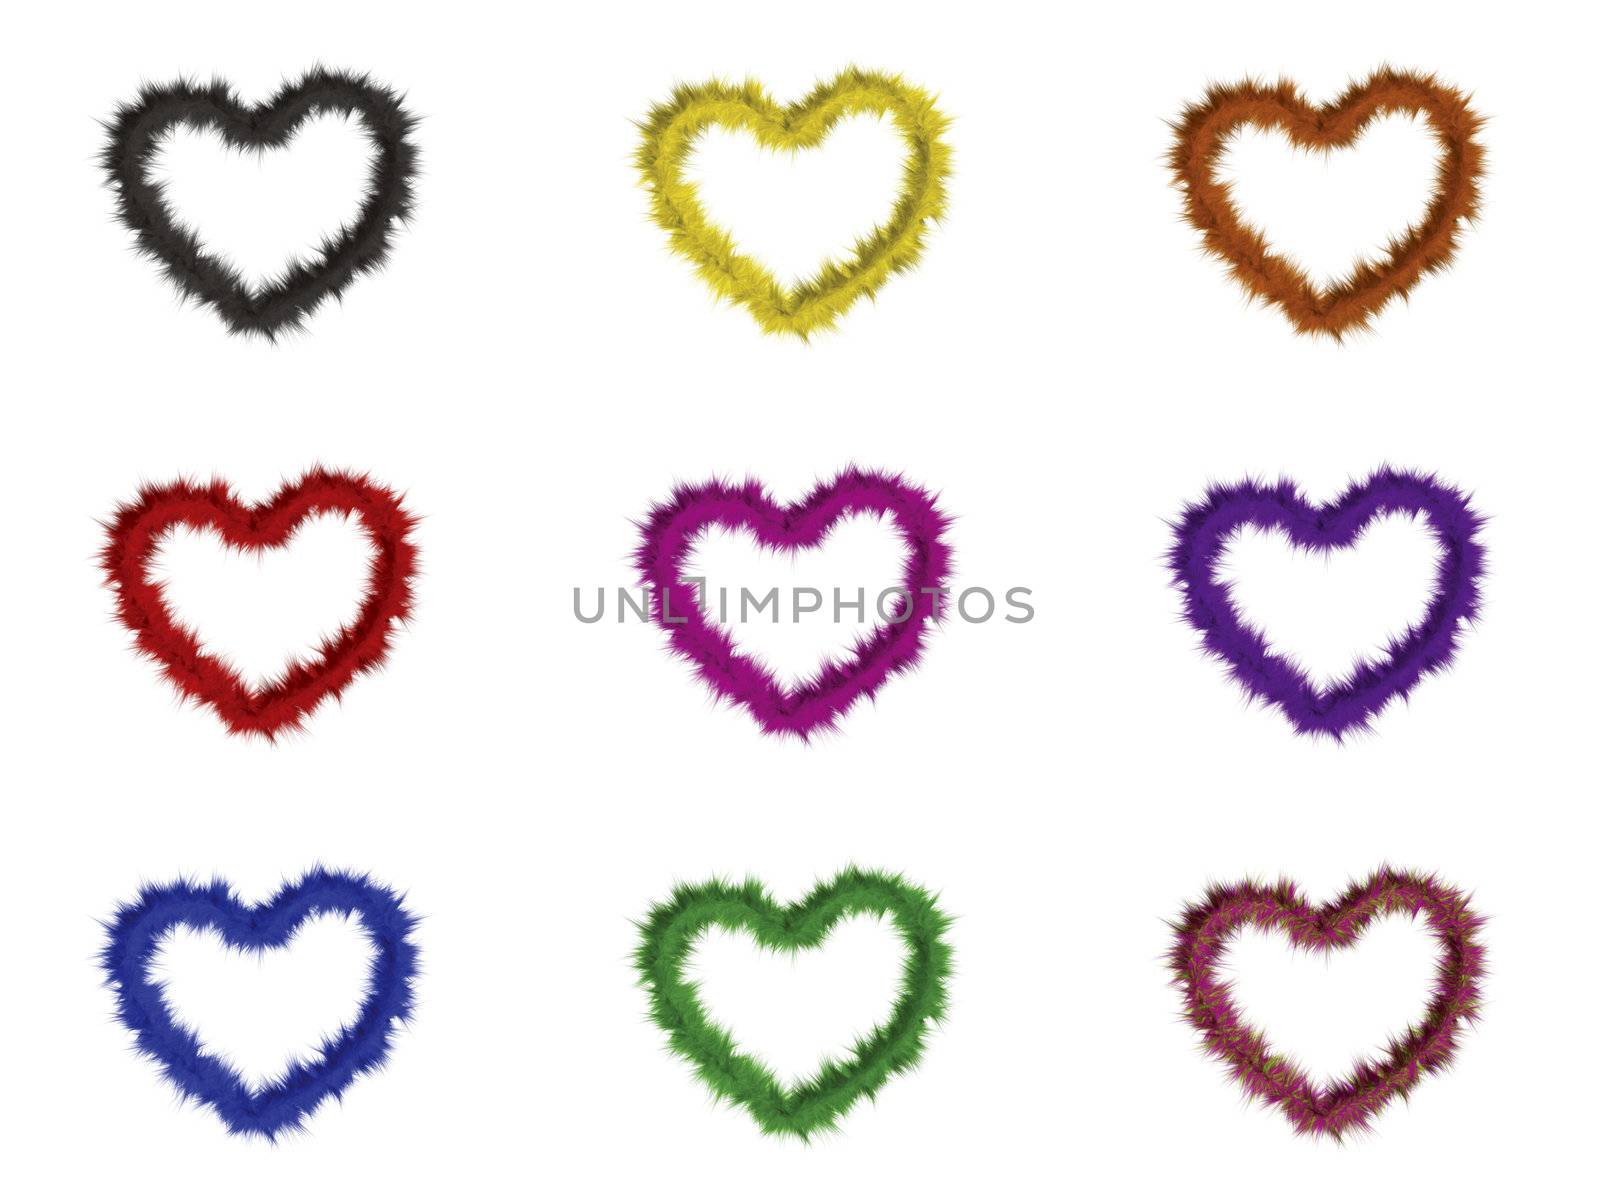 9 hearts with different colors by magraphics